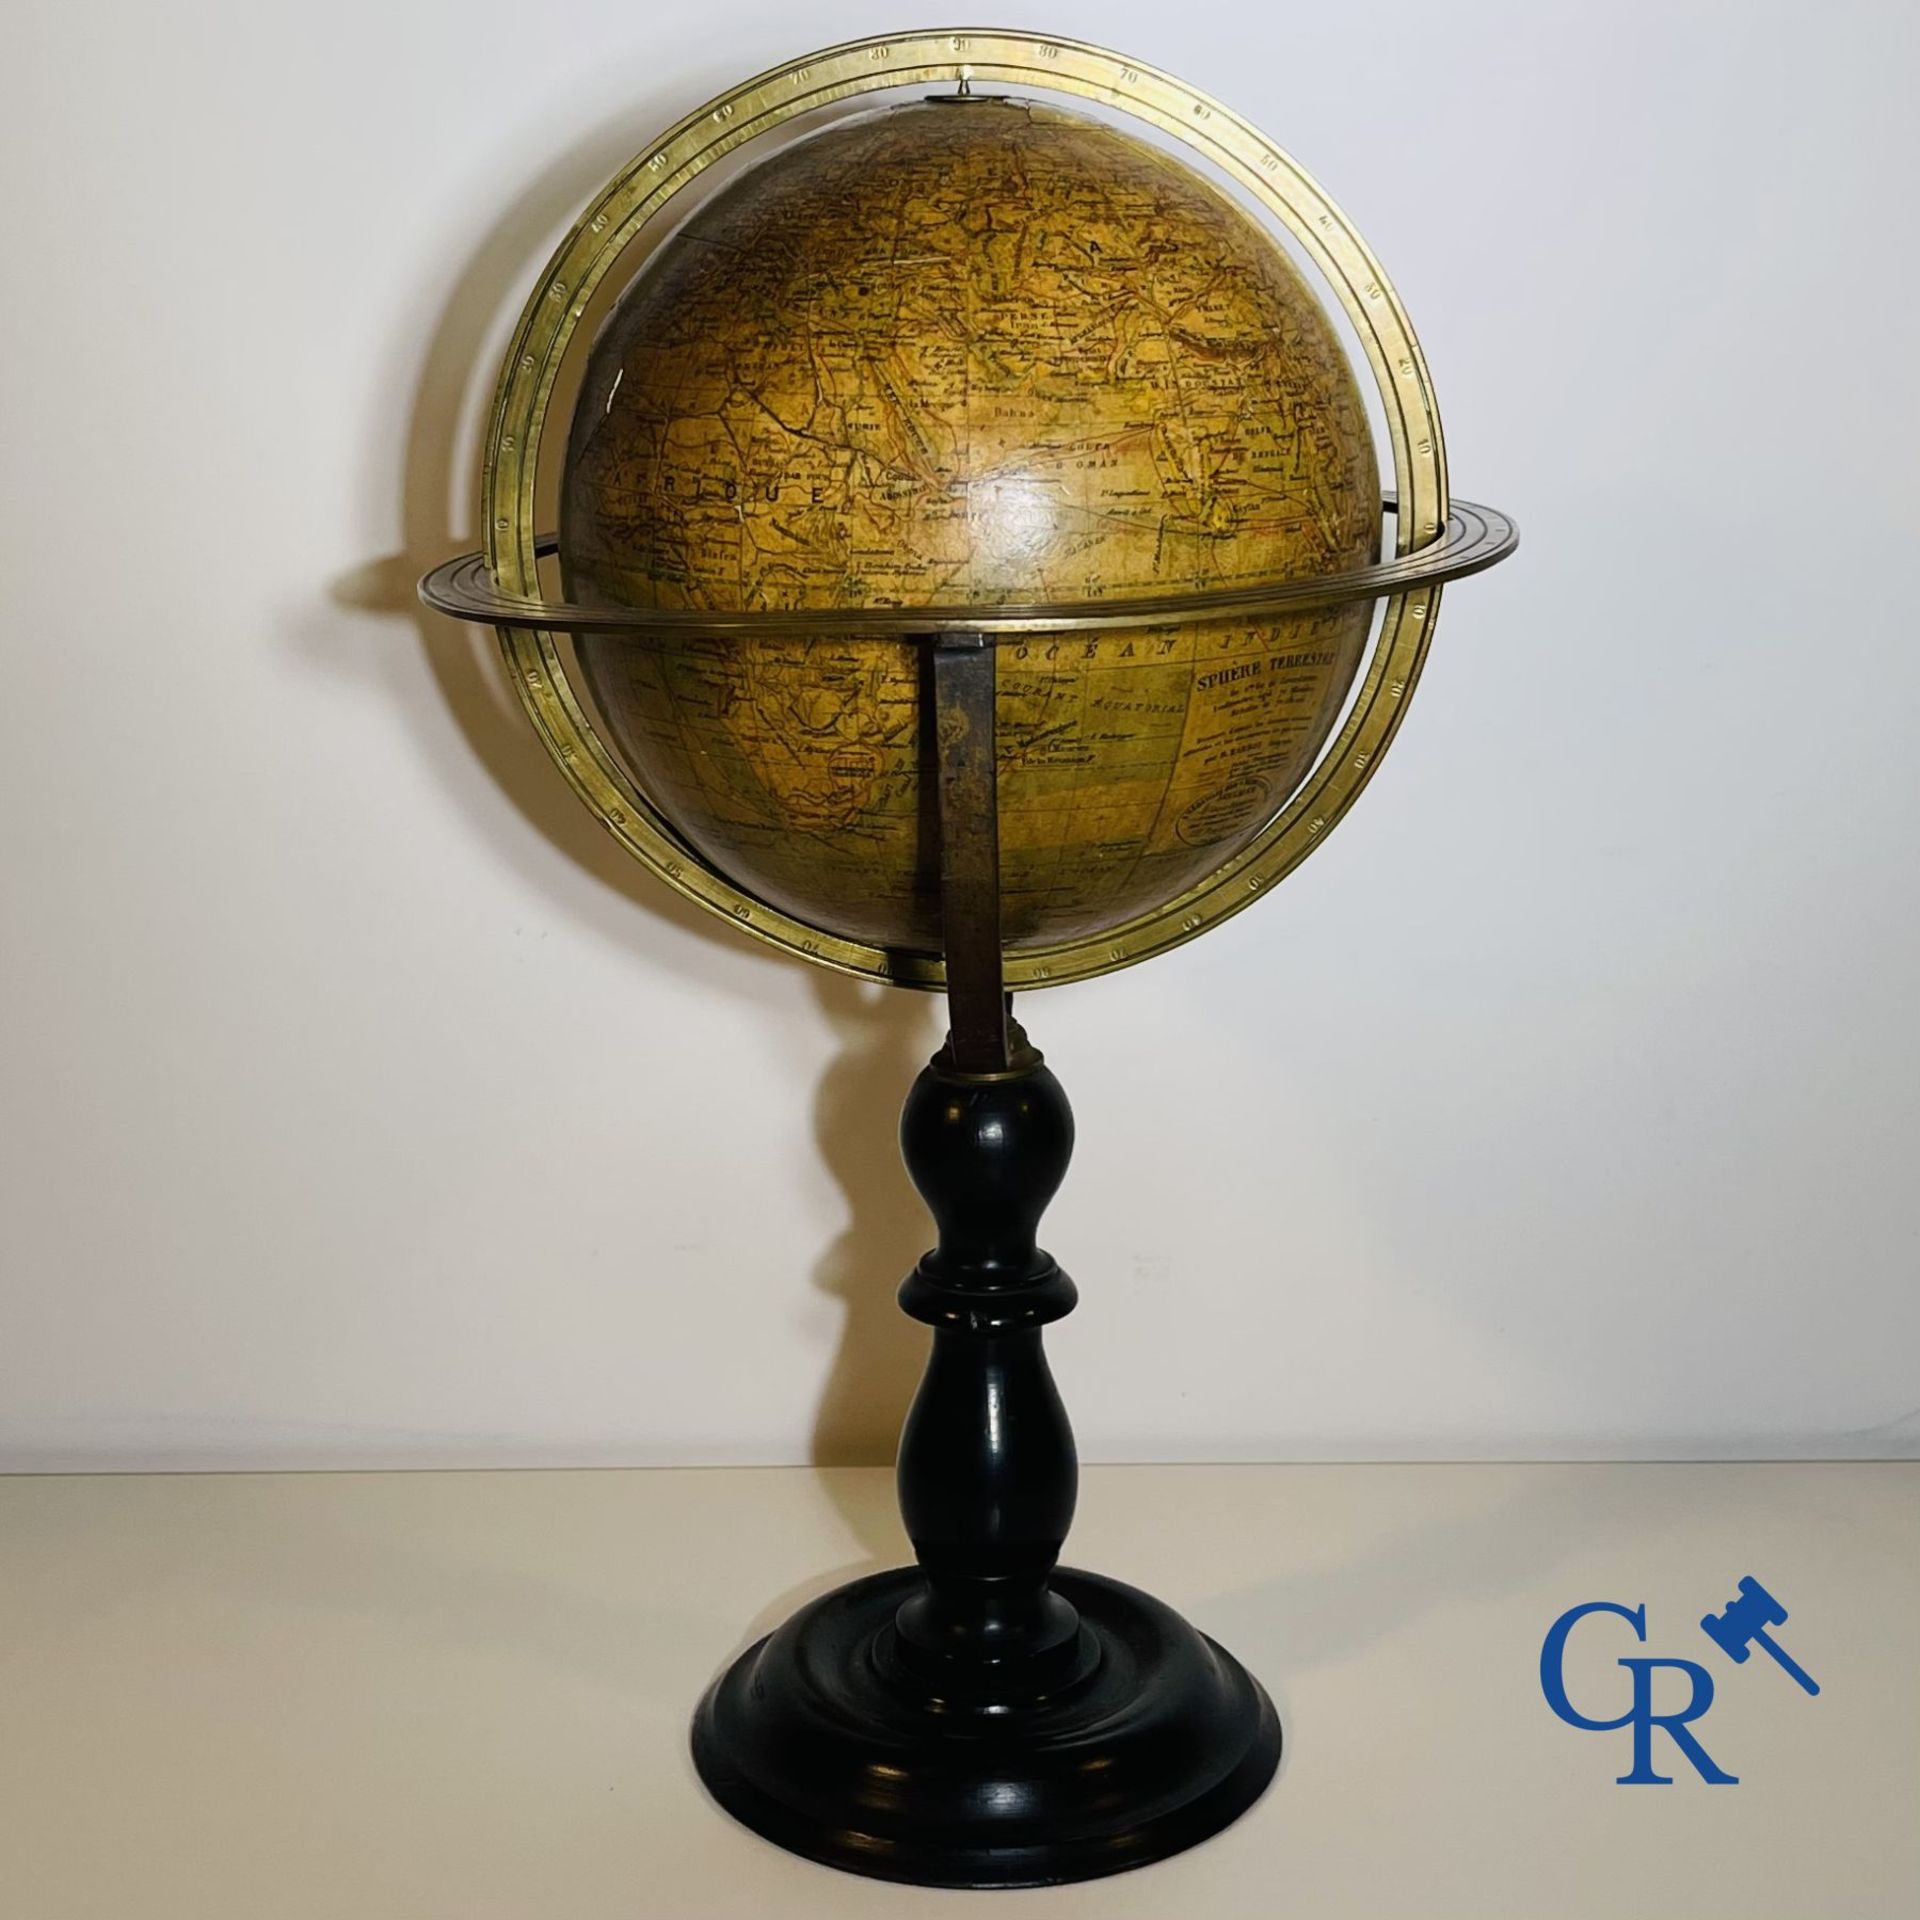 An antique globe with meridian circle on a black lacquered wooden base. 19th century.